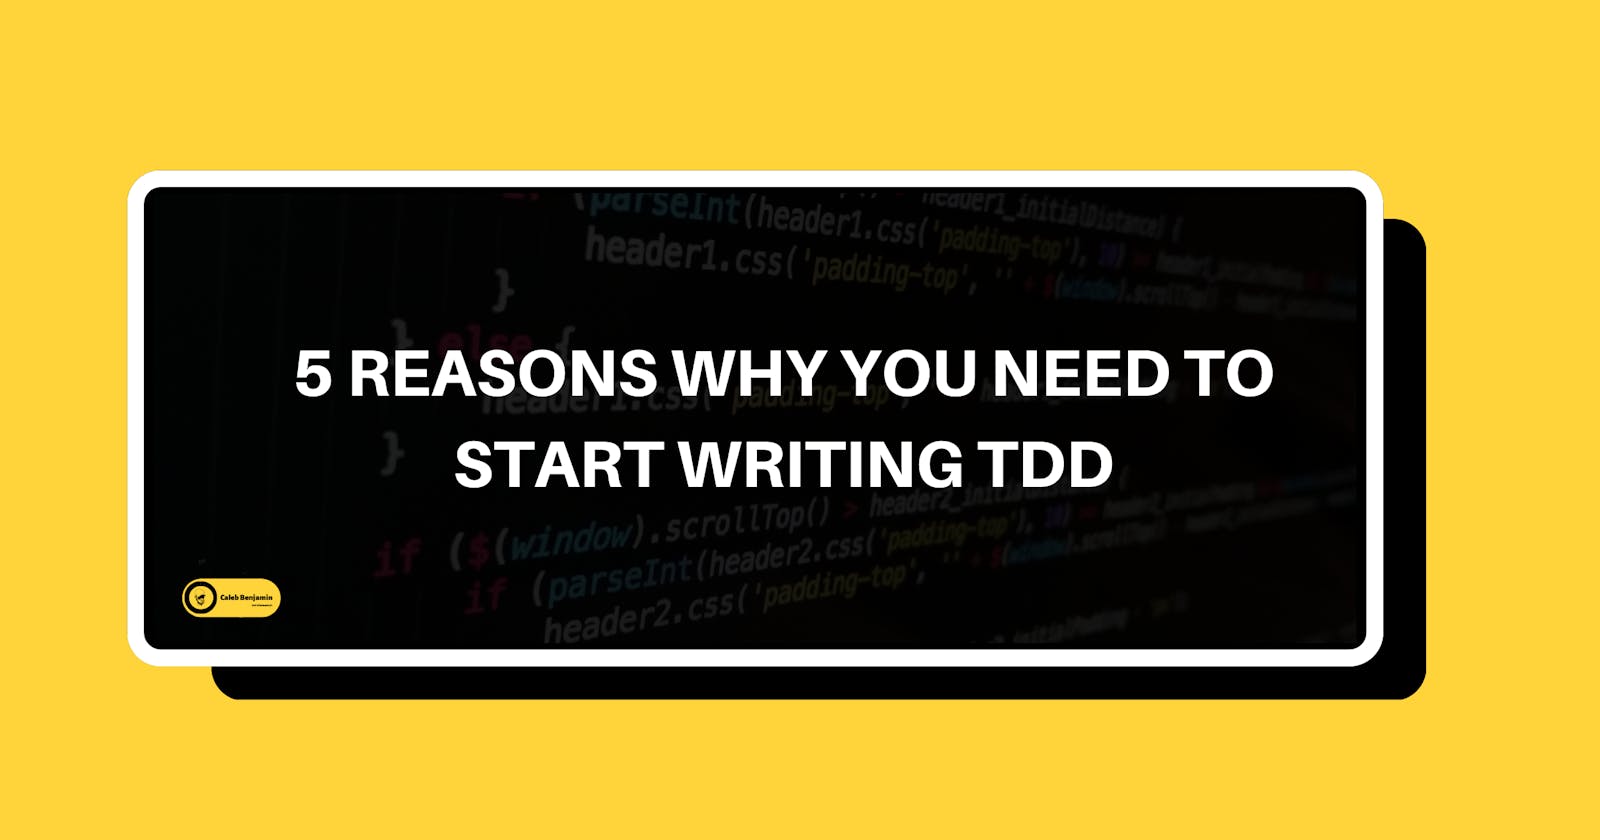 5 reasons why you need to start writing Test-driven development (TDD)